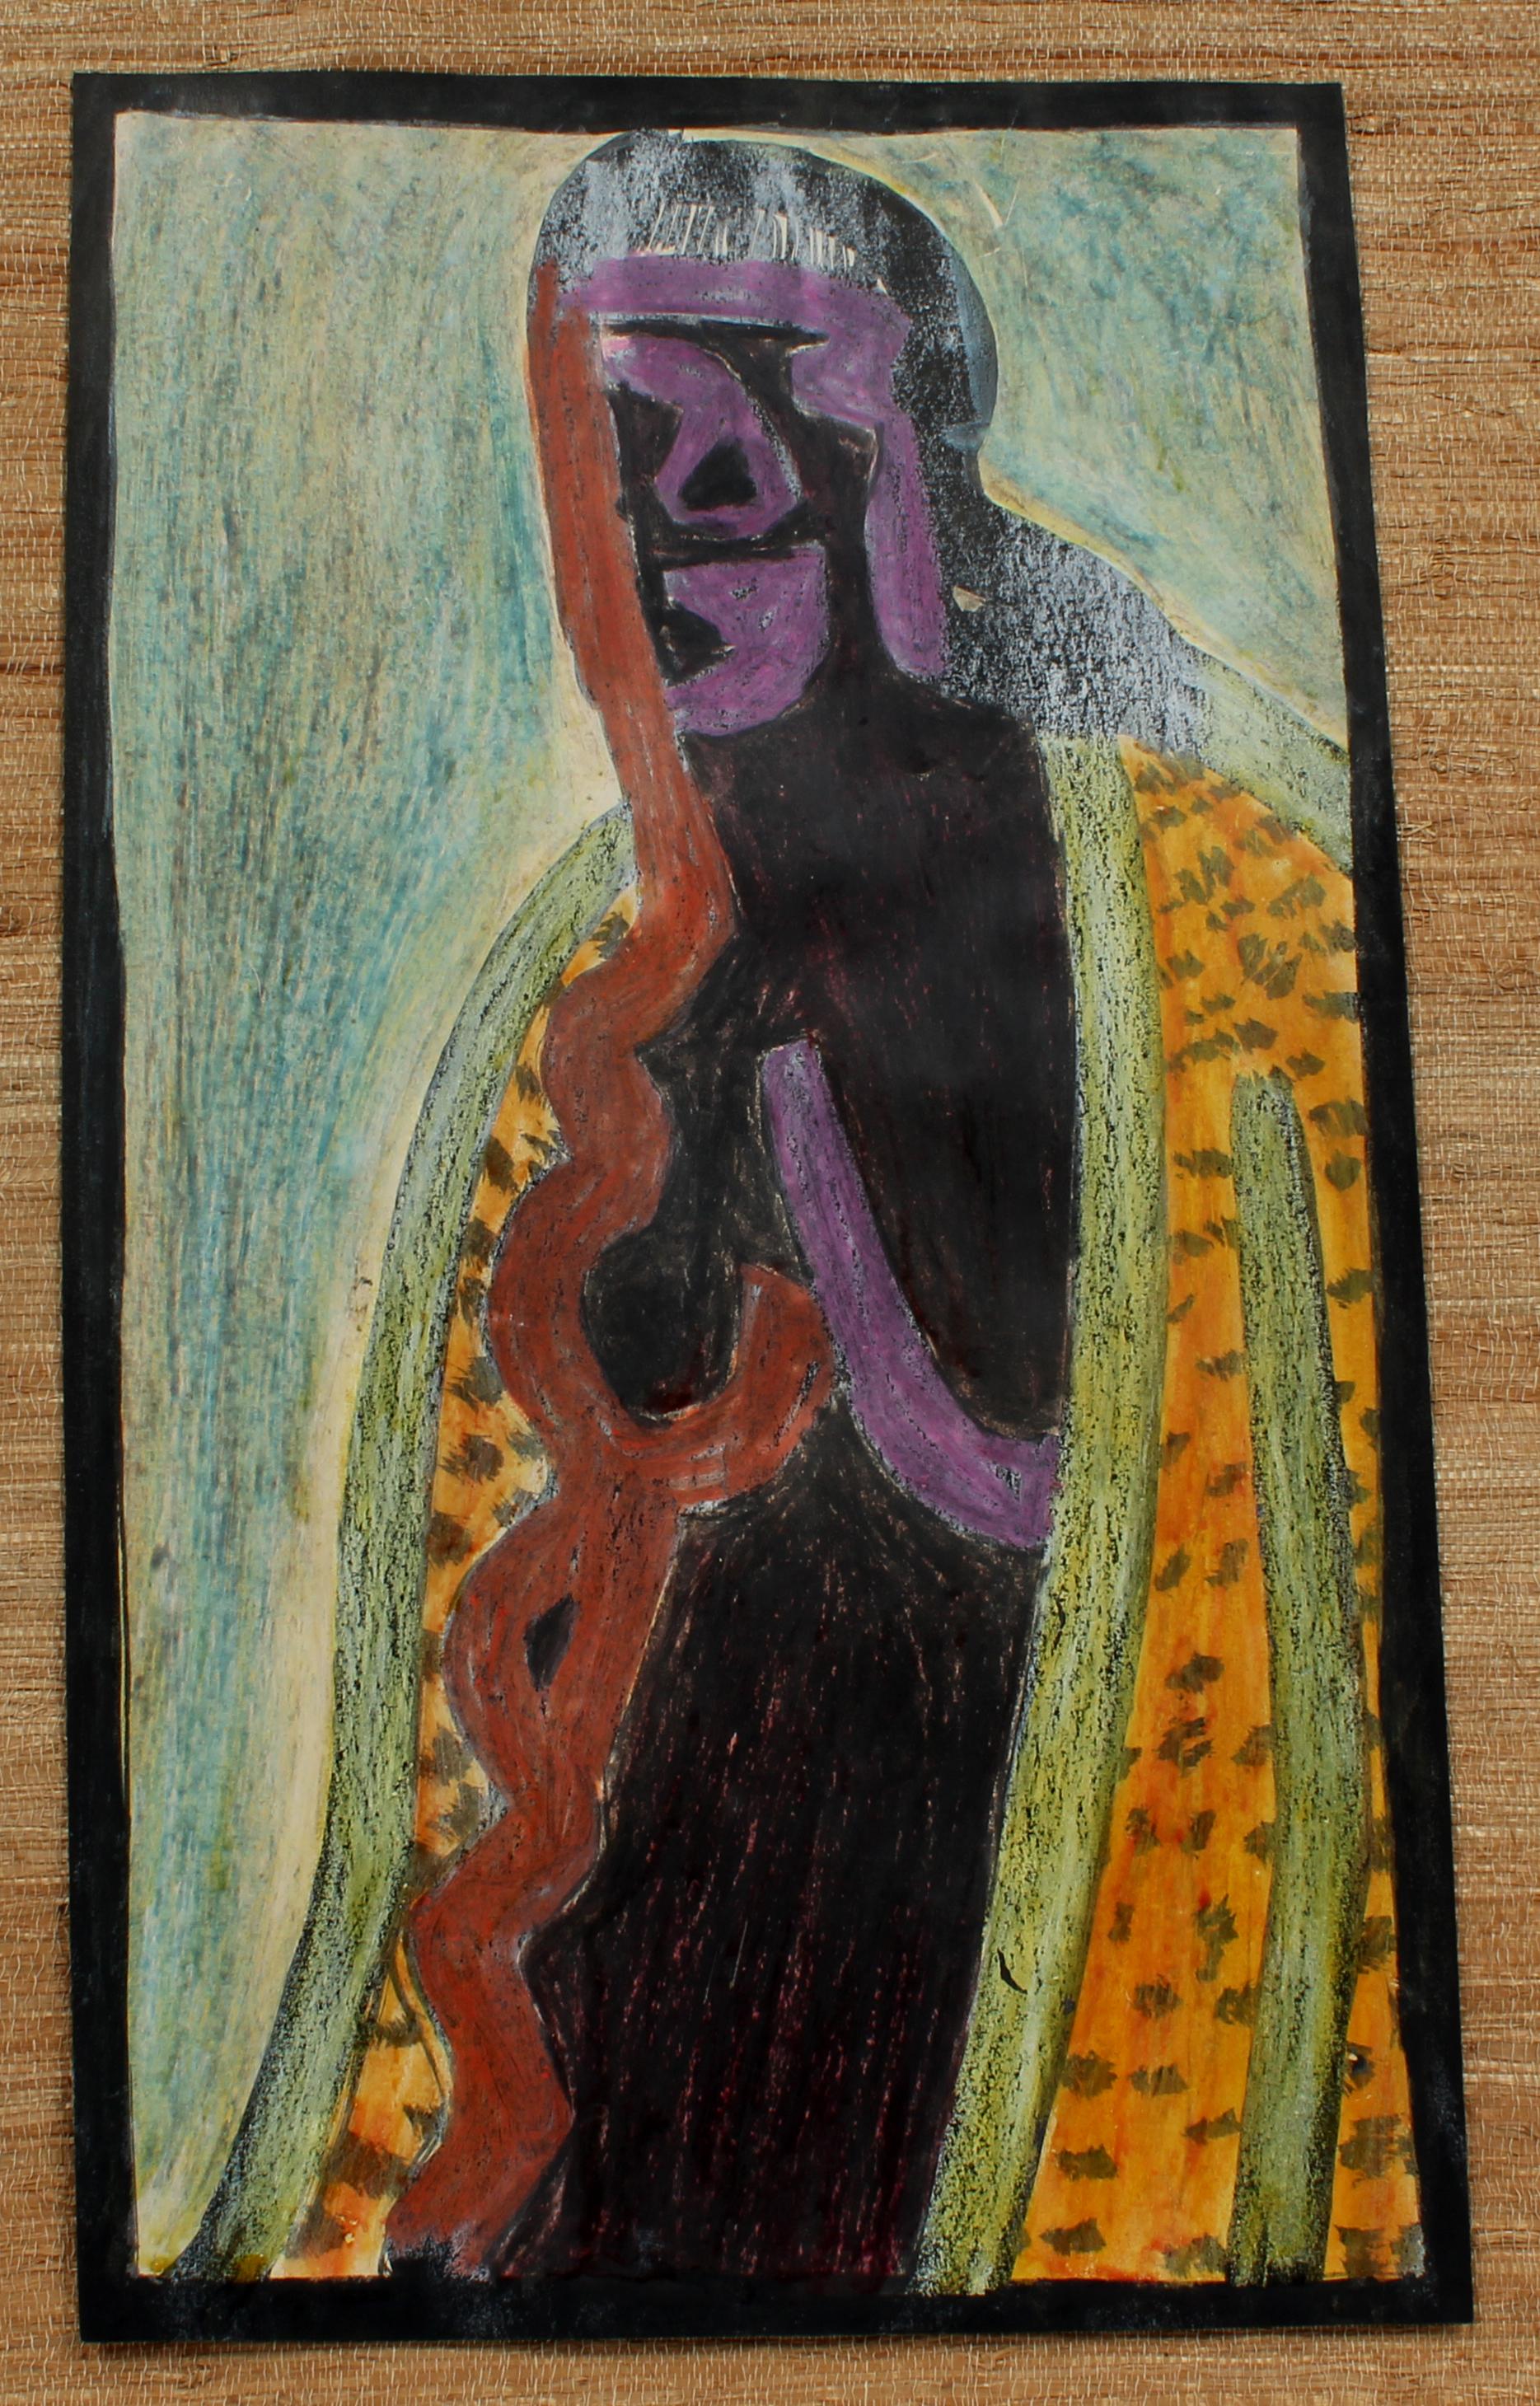 Abstract figurative painting on board. Carl Bredemier label on the reverse. Framed. Oil on board